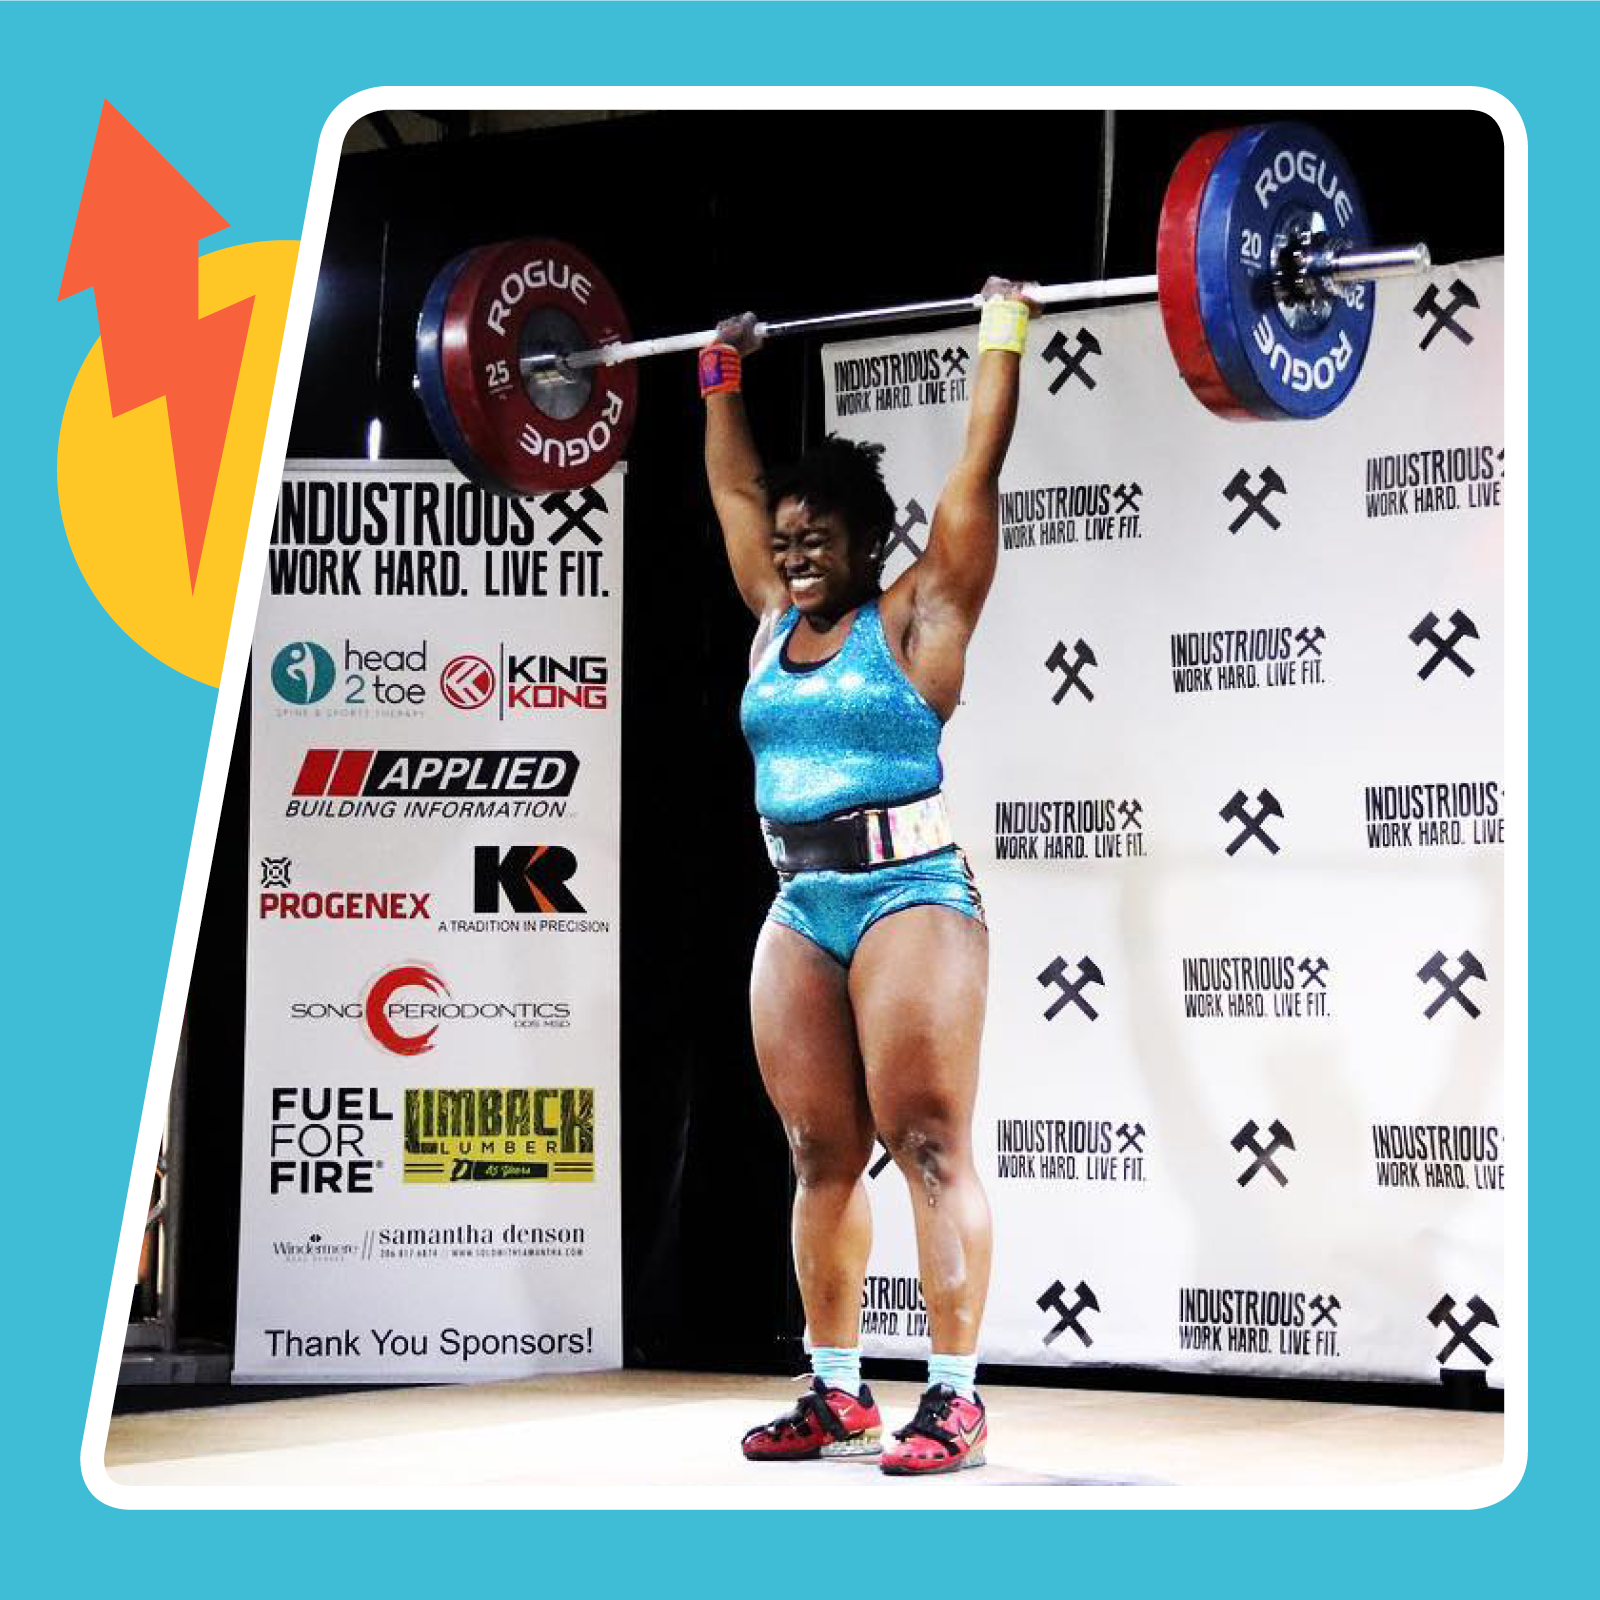 Olympic Weightlifting Changed My Relationship With My Body